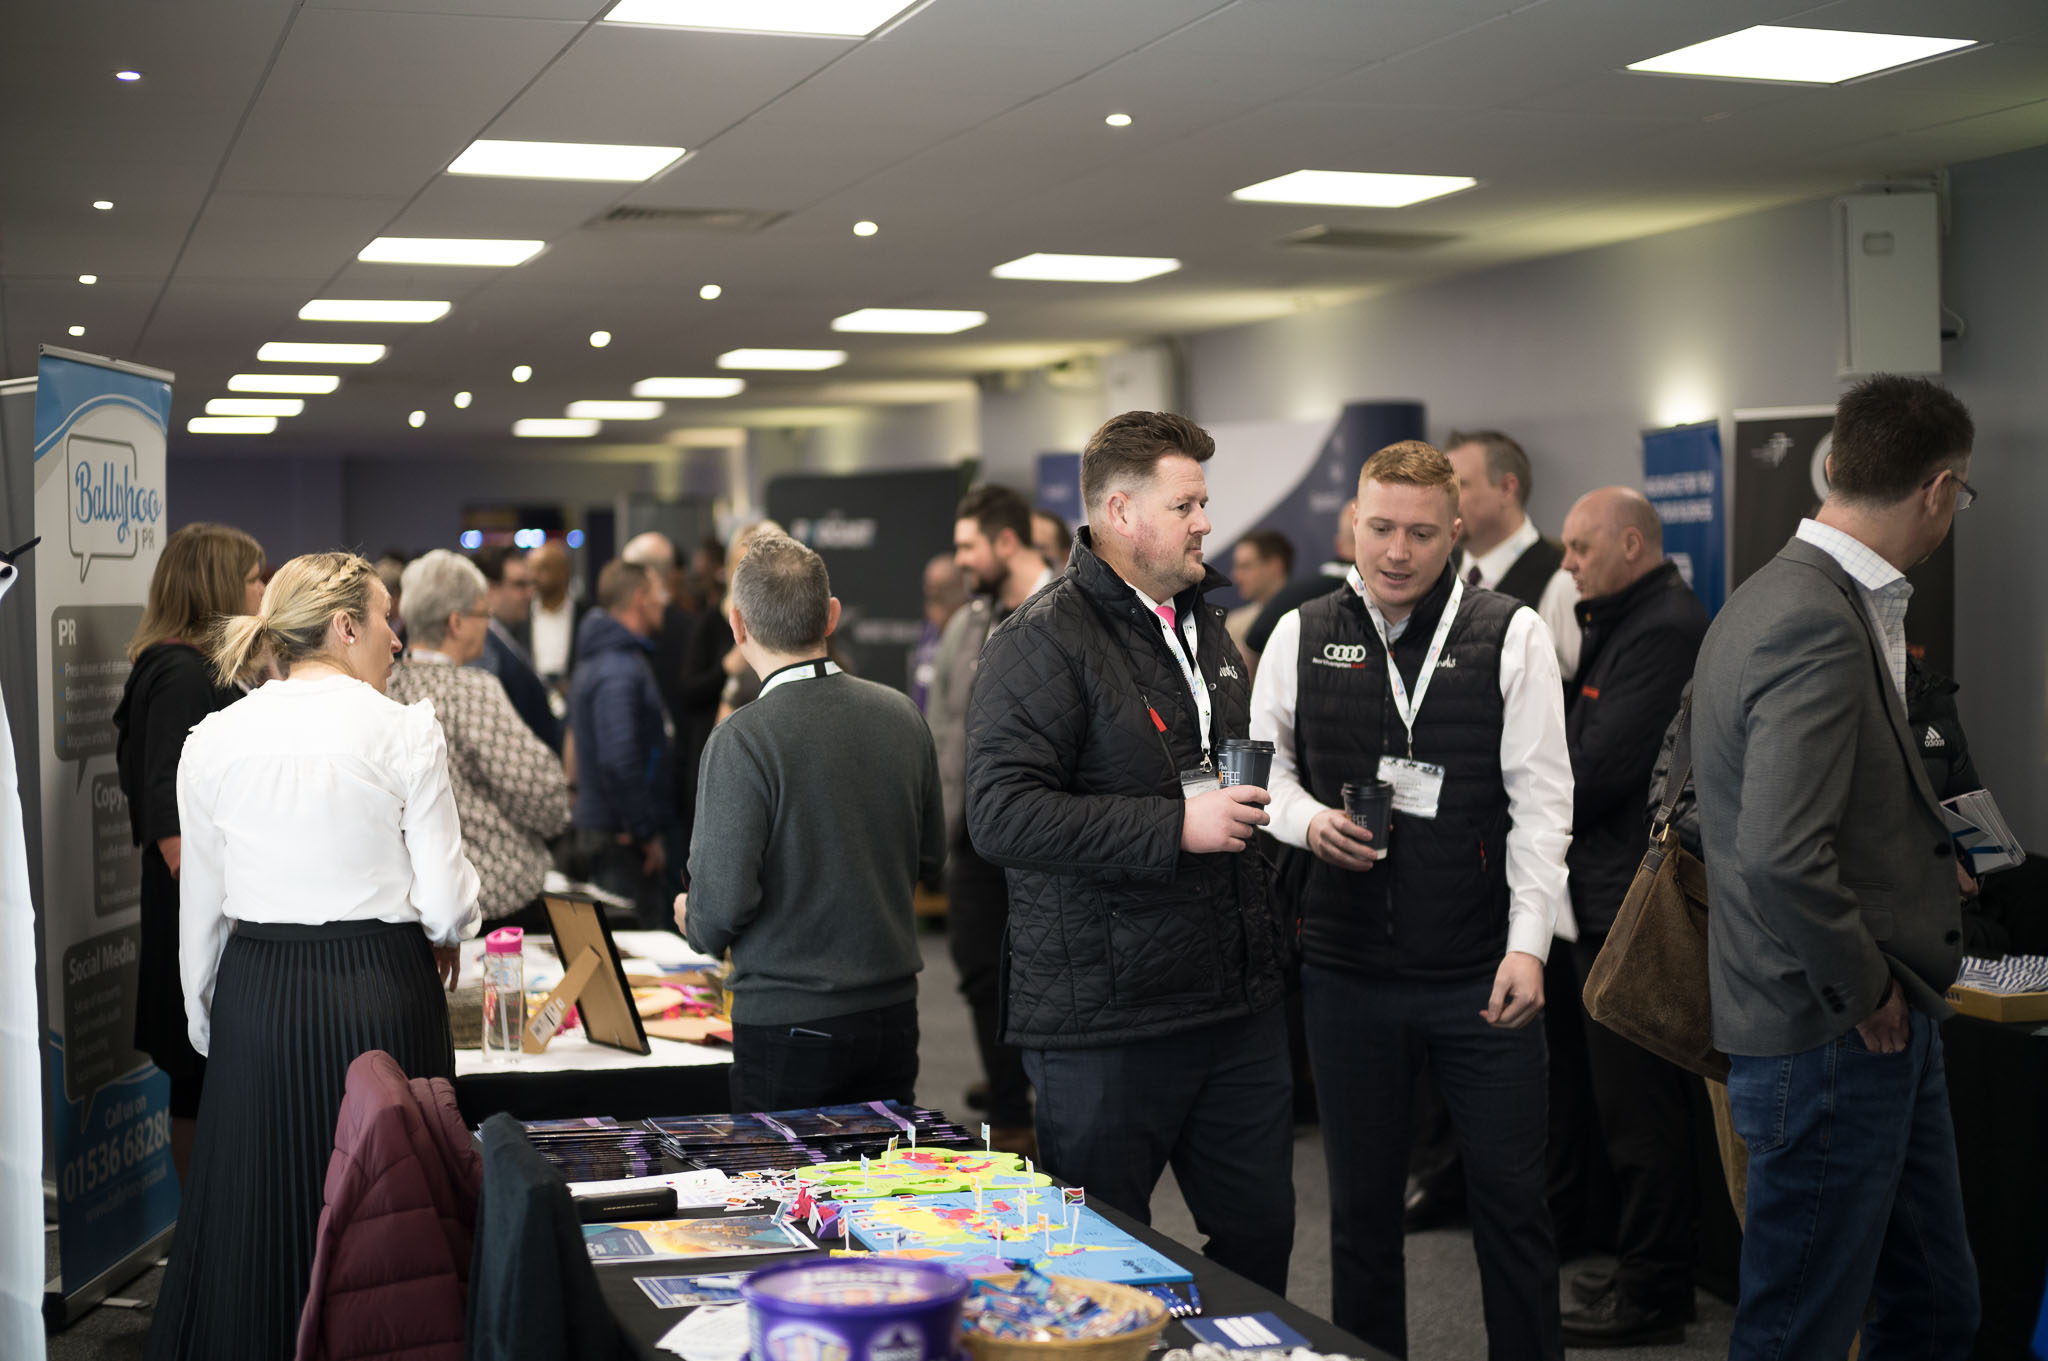 Northamptonshire Business Exhibition - Chamber Connect Stands | Northampton Chamber of Commerce